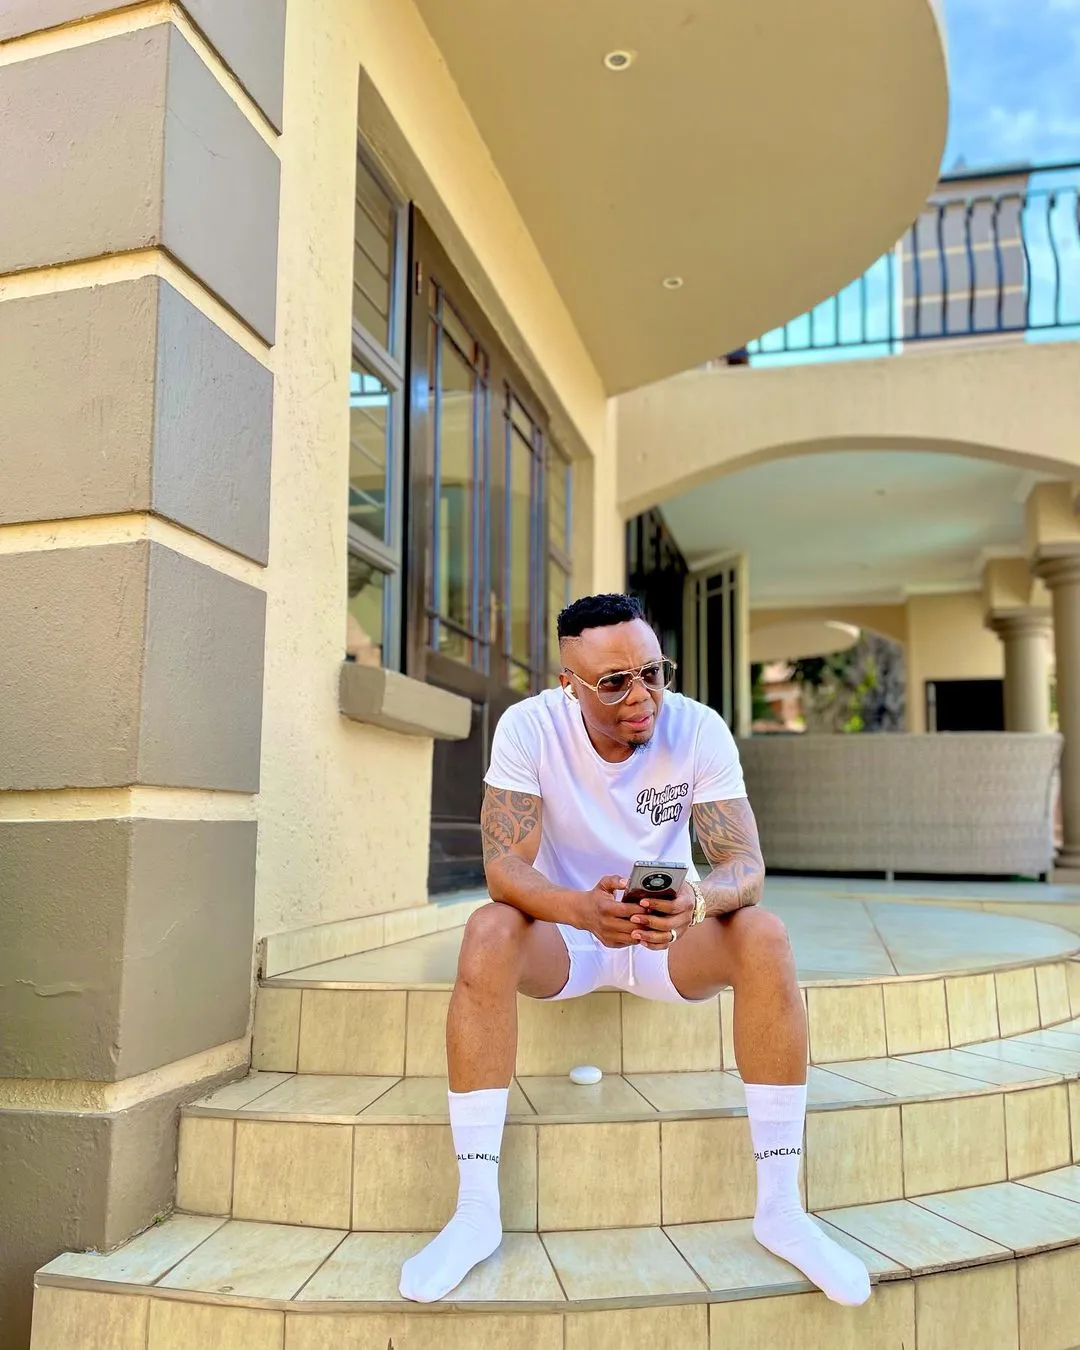 South African DJ, record producer and Kwaito artist, DJ Tira, and his wife, Gugu Khathi, have wowed South Africans with his mansion that screams opulence.